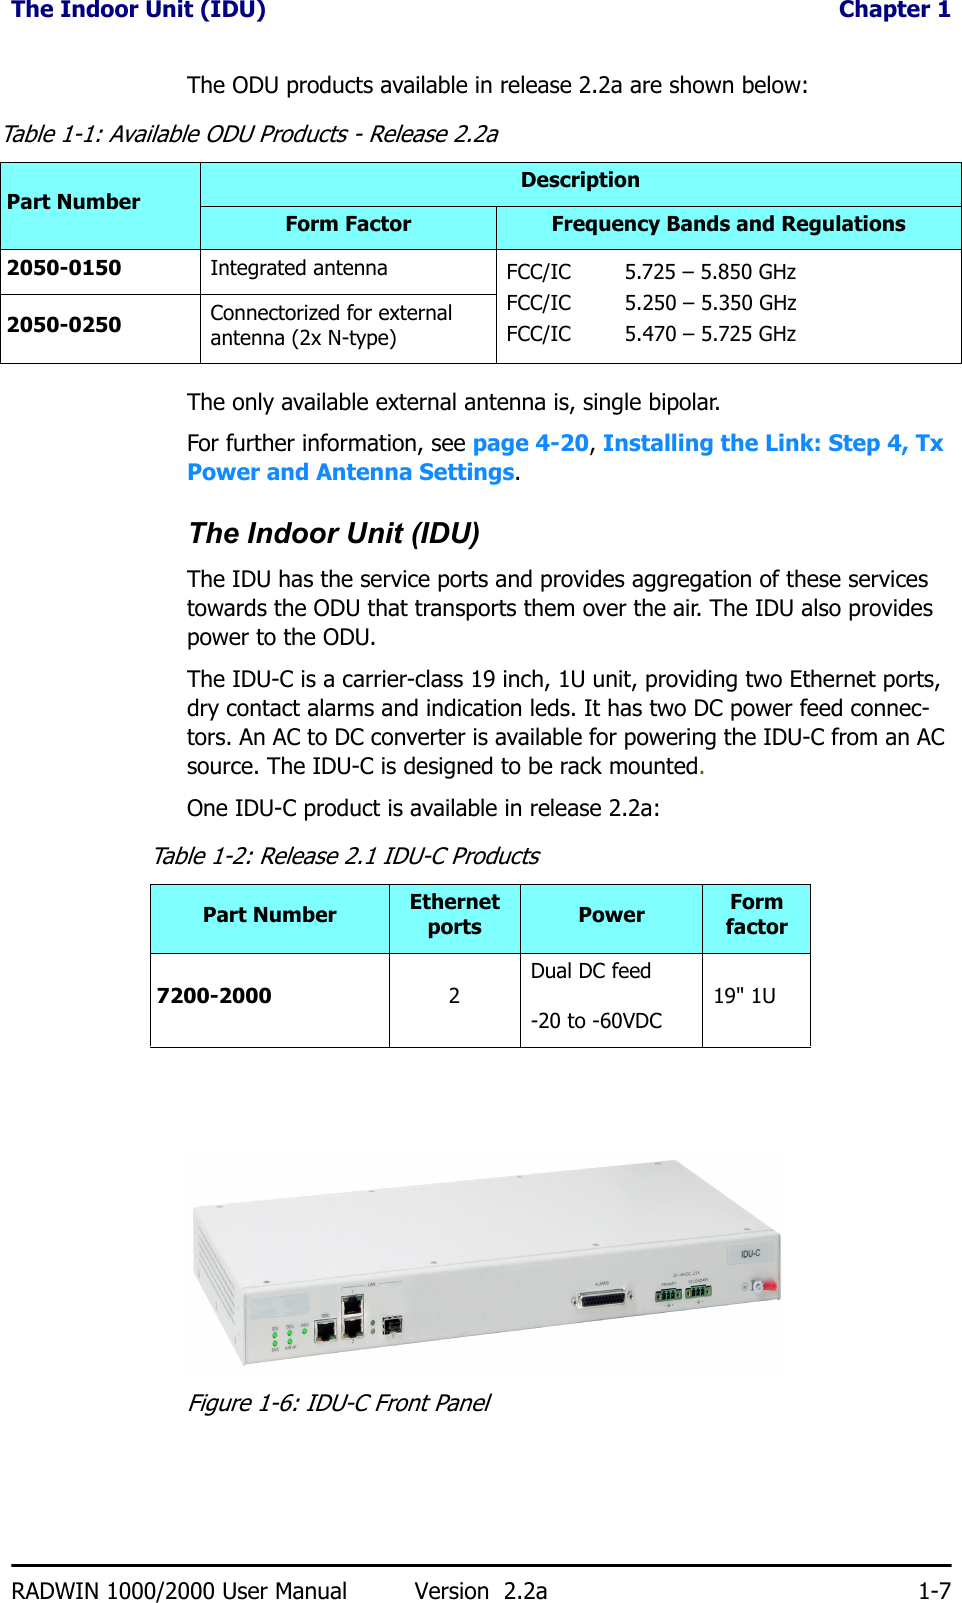 The Indoor Unit (IDU)  Chapter 1RADWIN 1000/2000 User Manual Version  2.2a 1-7The ODU products available in release 2.2a are shown below:The only available external antenna is, single bipolar.For further information, see page 4-20, Installing the Link: Step 4, Tx Power and Antenna Settings.The Indoor Unit (IDU)The IDU has the service ports and provides aggregation of these services towards the ODU that transports them over the air. The IDU also provides power to the ODU.The IDU-C is a carrier-class 19 inch, 1U unit, providing two Ethernet ports, dry contact alarms and indication leds. It has two DC power feed connec-tors. An AC to DC converter is available for powering the IDU-C from an AC source. The IDU-C is designed to be rack mounted.One IDU-C product is available in release 2.2a:Figure 1-6: IDU-C Front PanelTable 1-1: Available ODU Products - Release 2.2aPart NumberDescriptionForm Factor Frequency Bands and Regulations2050-0150 Integrated antenna  FCC/IC 5.725 – 5.850 GHzFCC/IC 5.250 – 5.350 GHz FCC/IC 5.470 – 5.725 GHz2050-0250 Connectorized for external antenna (2x N-type)Table 1-2: Release 2.1 IDU-C ProductsPart Number Ethernet ports Power Form factor7200-2000 2Dual DC feed-20 to -60VDC 19&quot; 1U